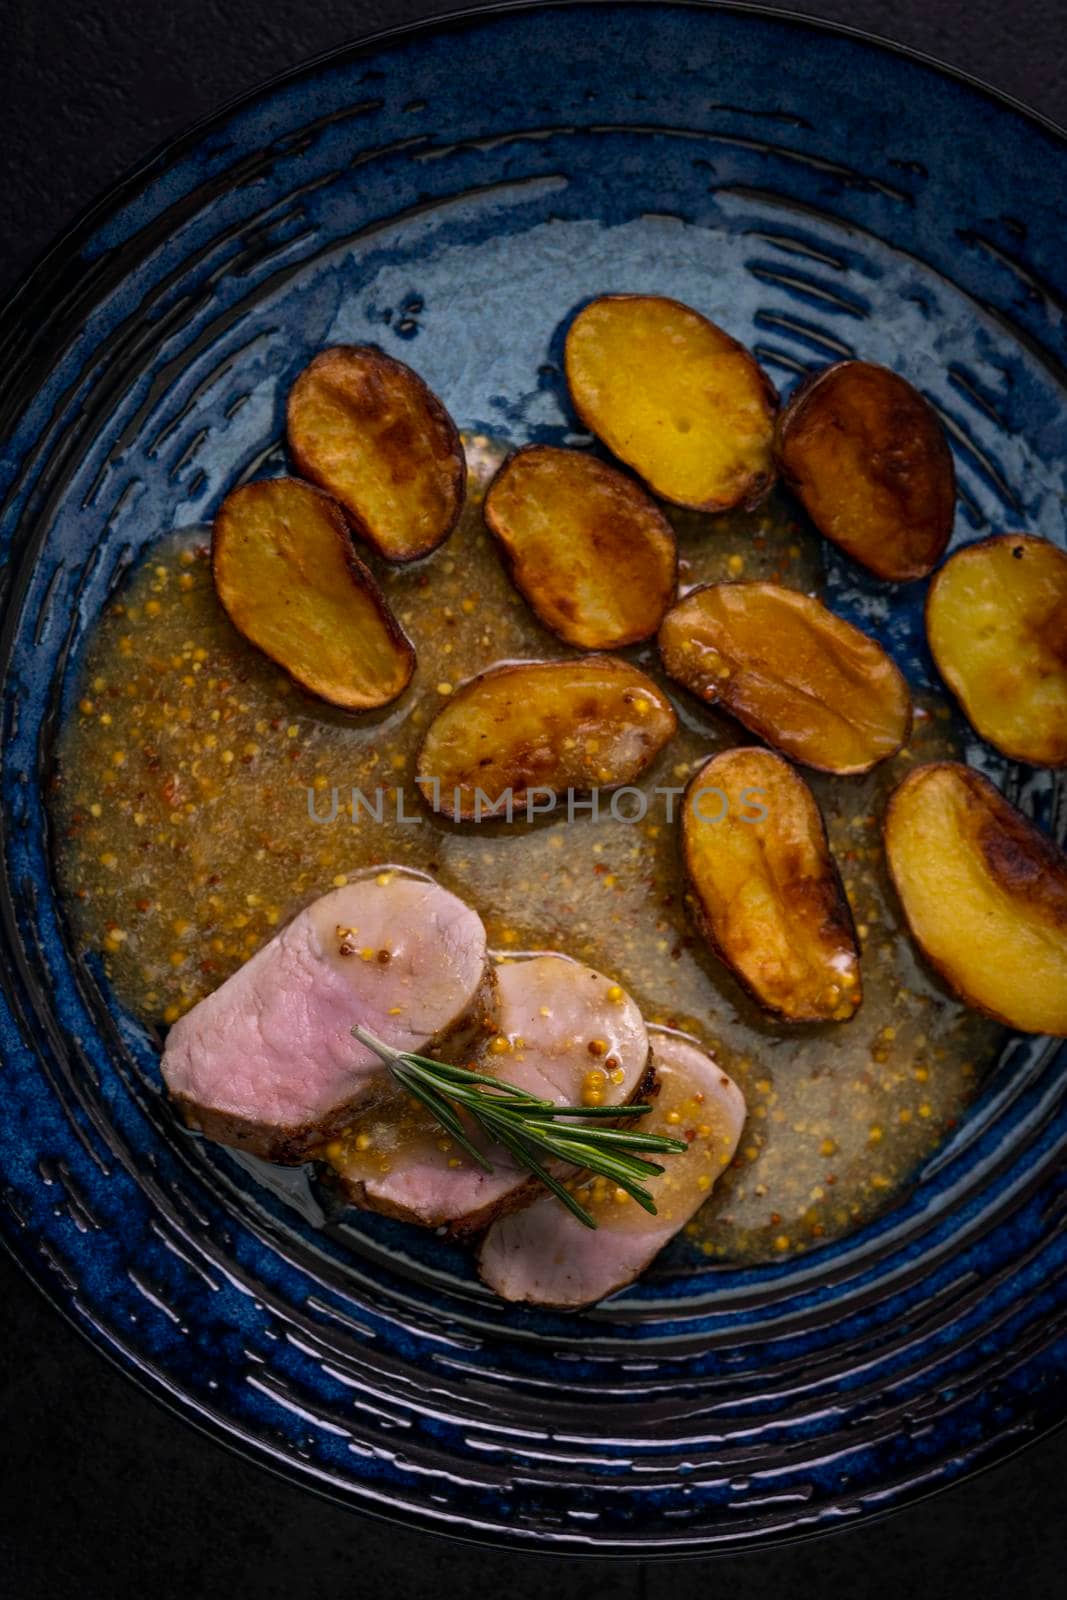 pork tenderloin with baked potatoes and French coarse mustard sauce by phbcz